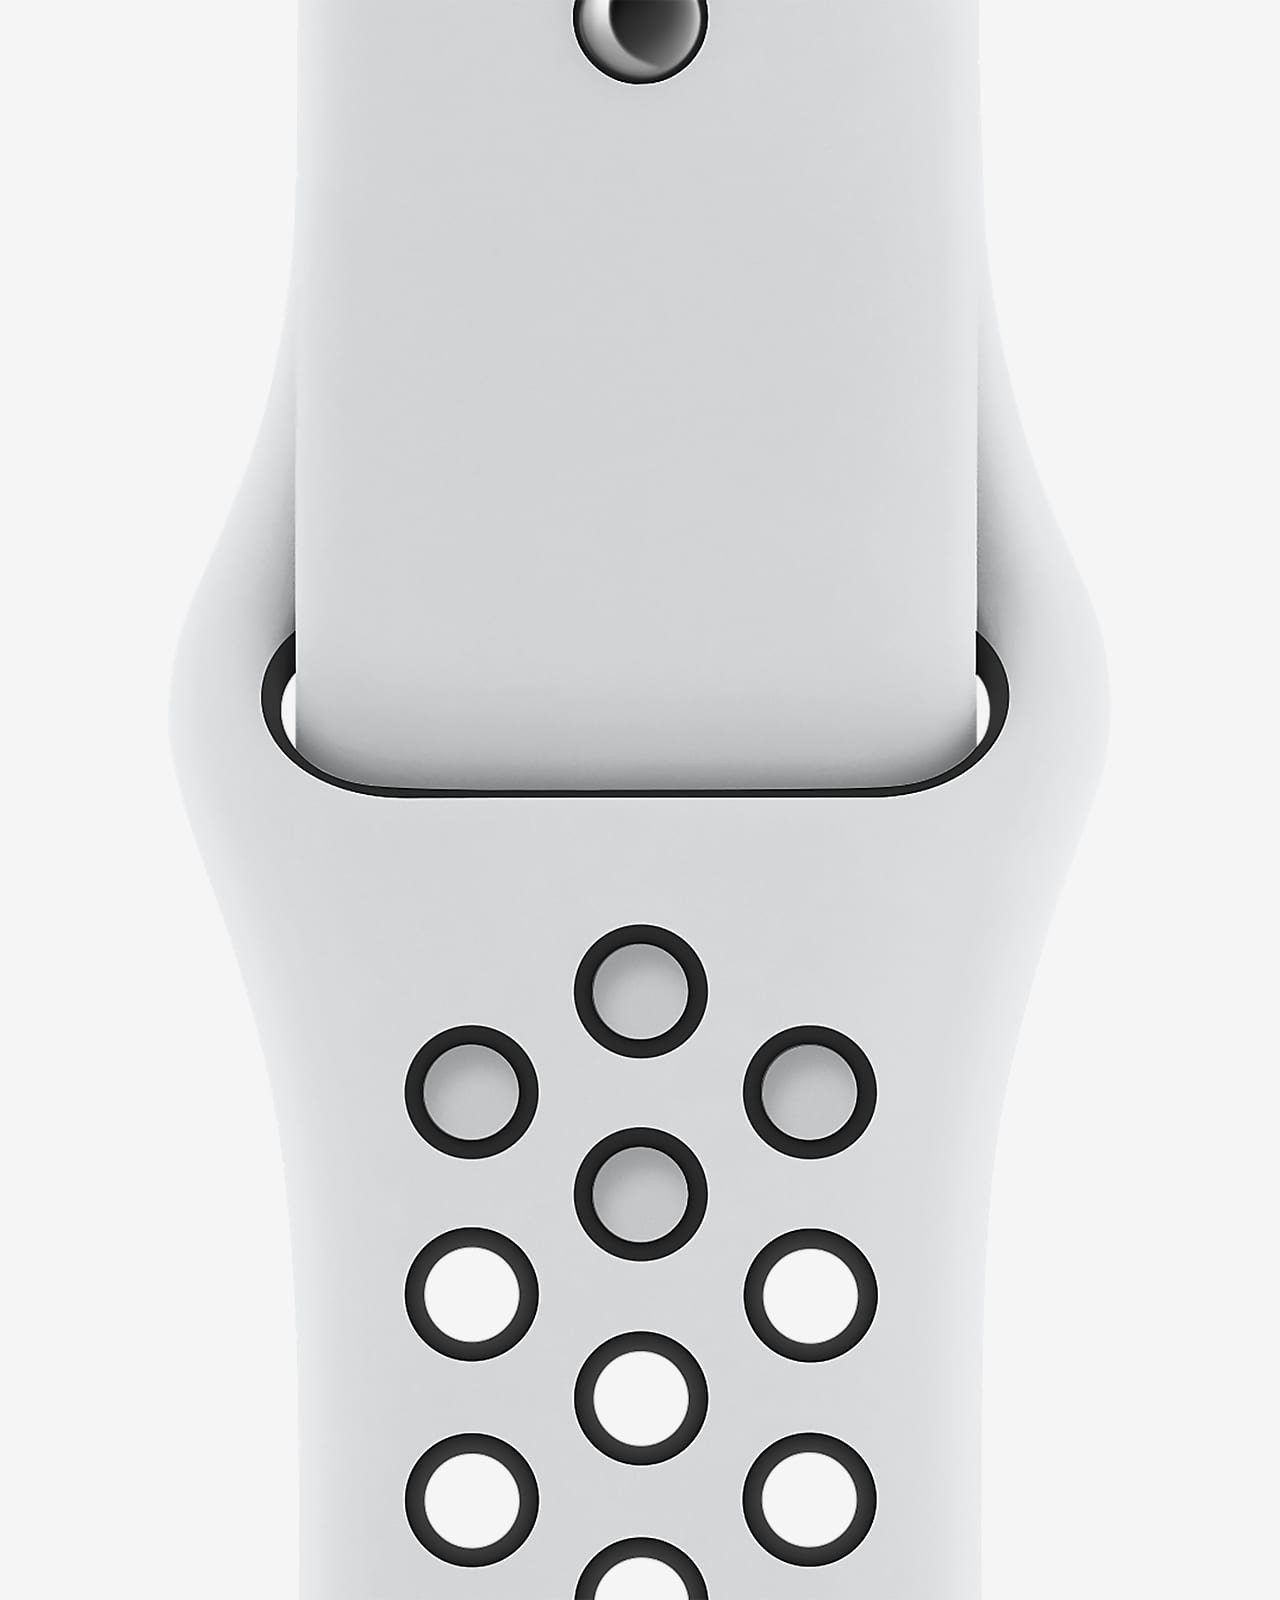 apple watch series 6 nike review